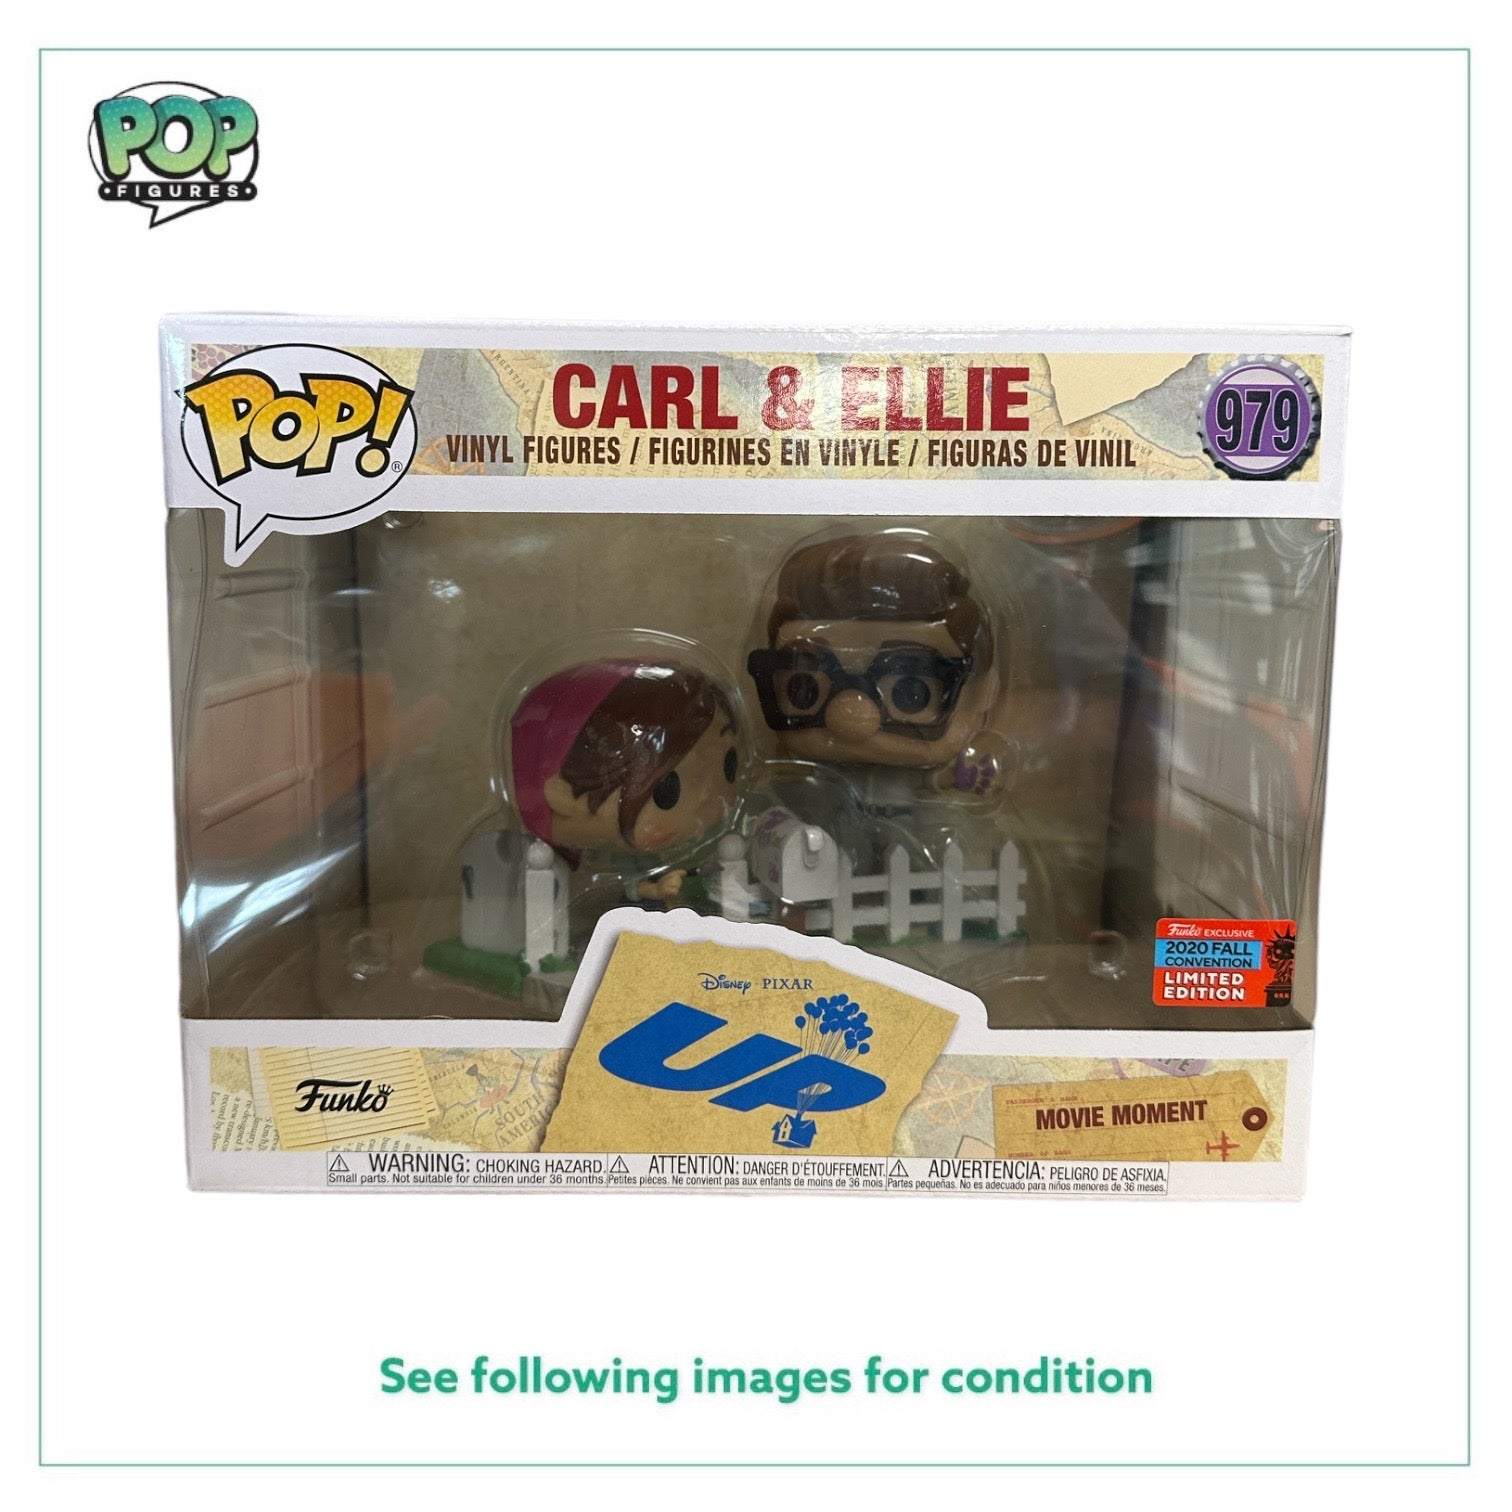 Carl & Ellie #979 (Painting) Deluxe Funko Pop! - Up - NYCC 2020 Shared